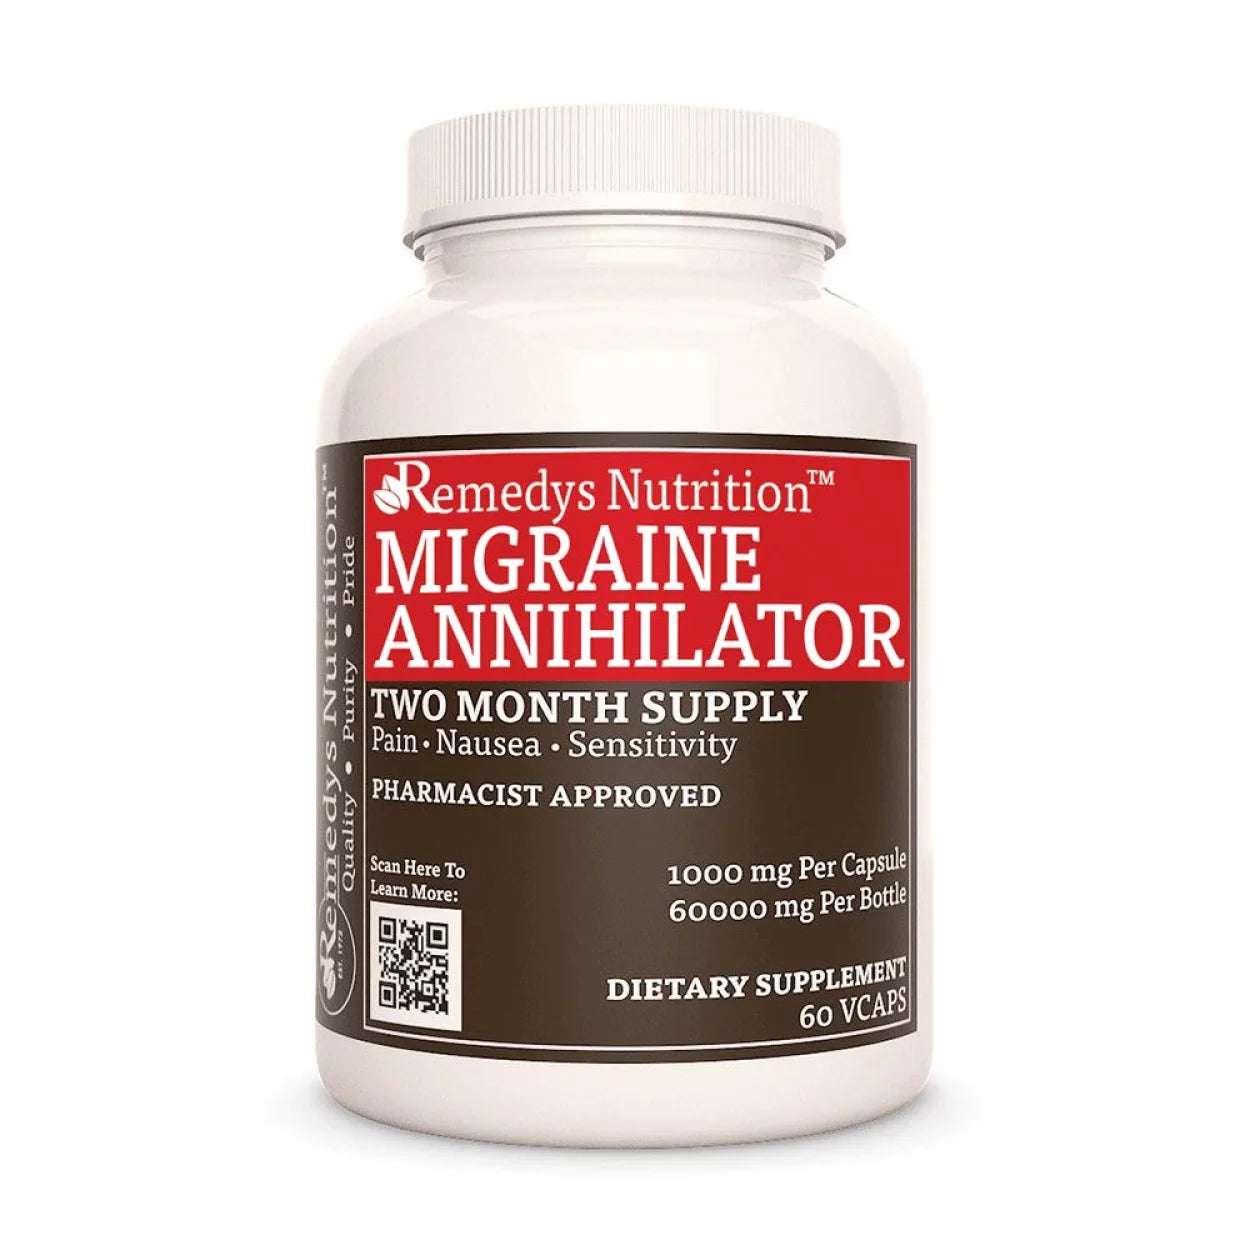 Image of Remedy's Nutrition® Migraine Annihilator™ Capsules Herbal Dietary Supplement bottle. Made in USA. Feverfew, Ginger.